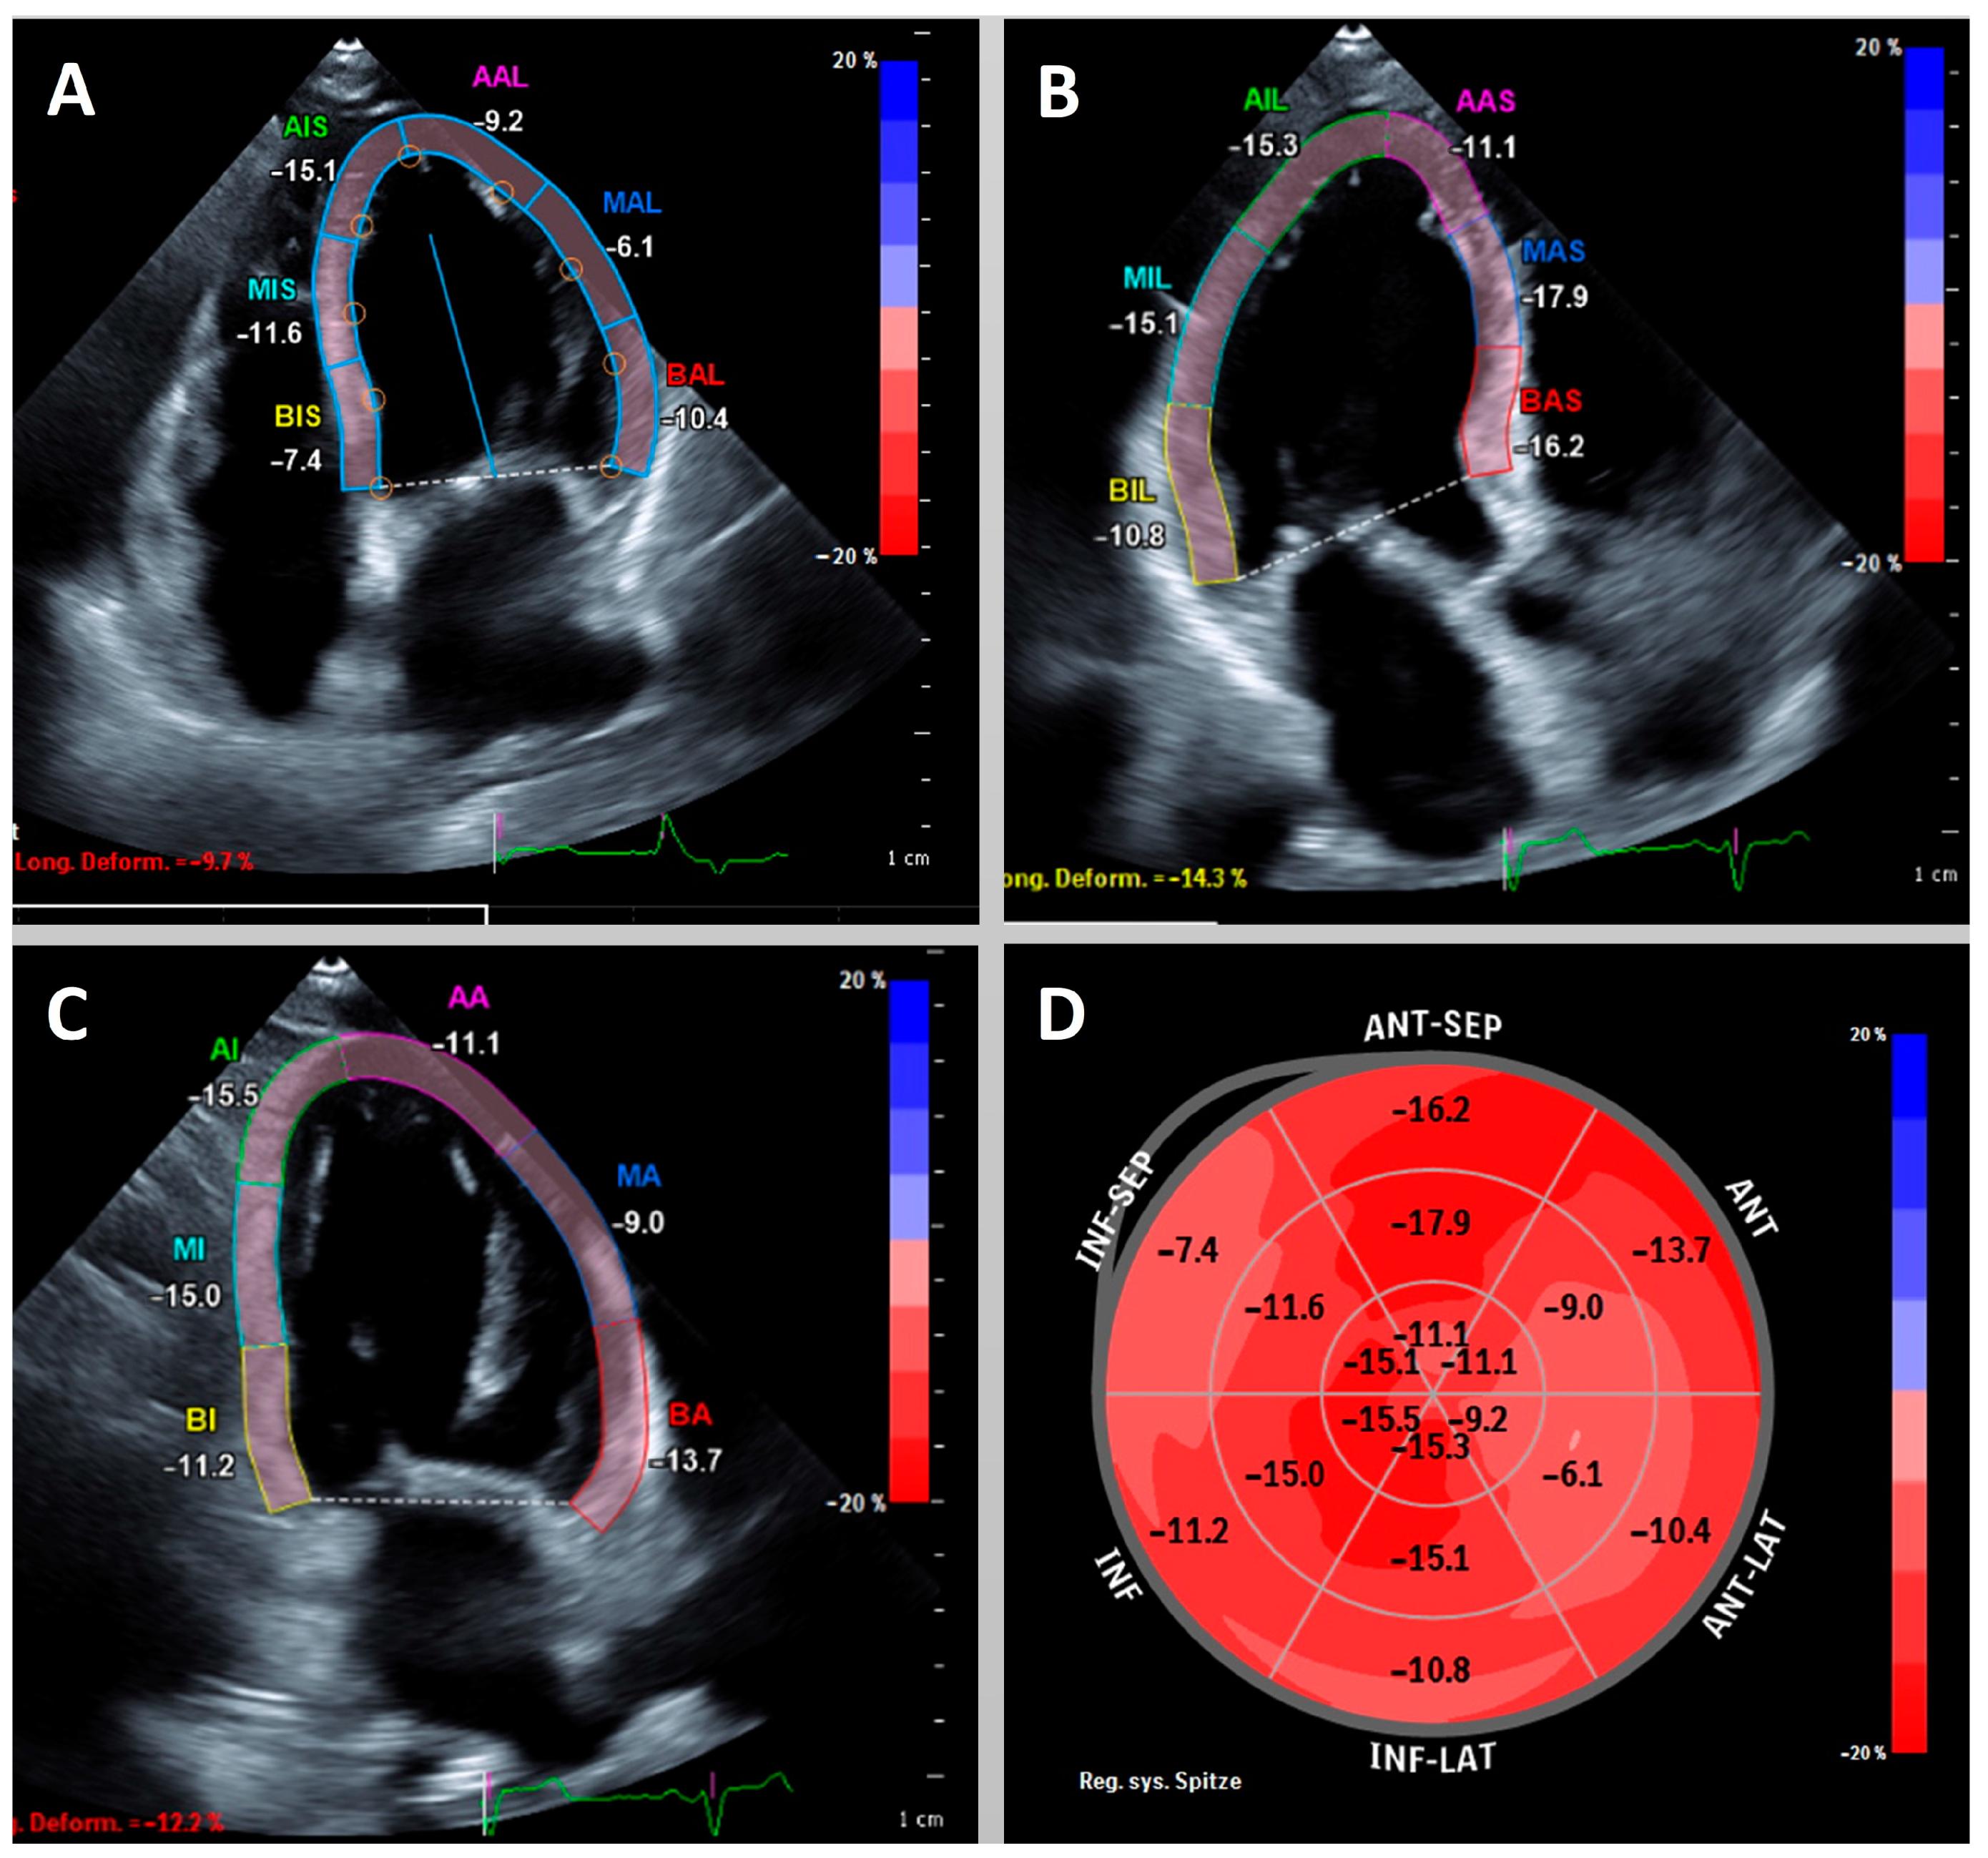 Global myocardial strain assessment by different imaging